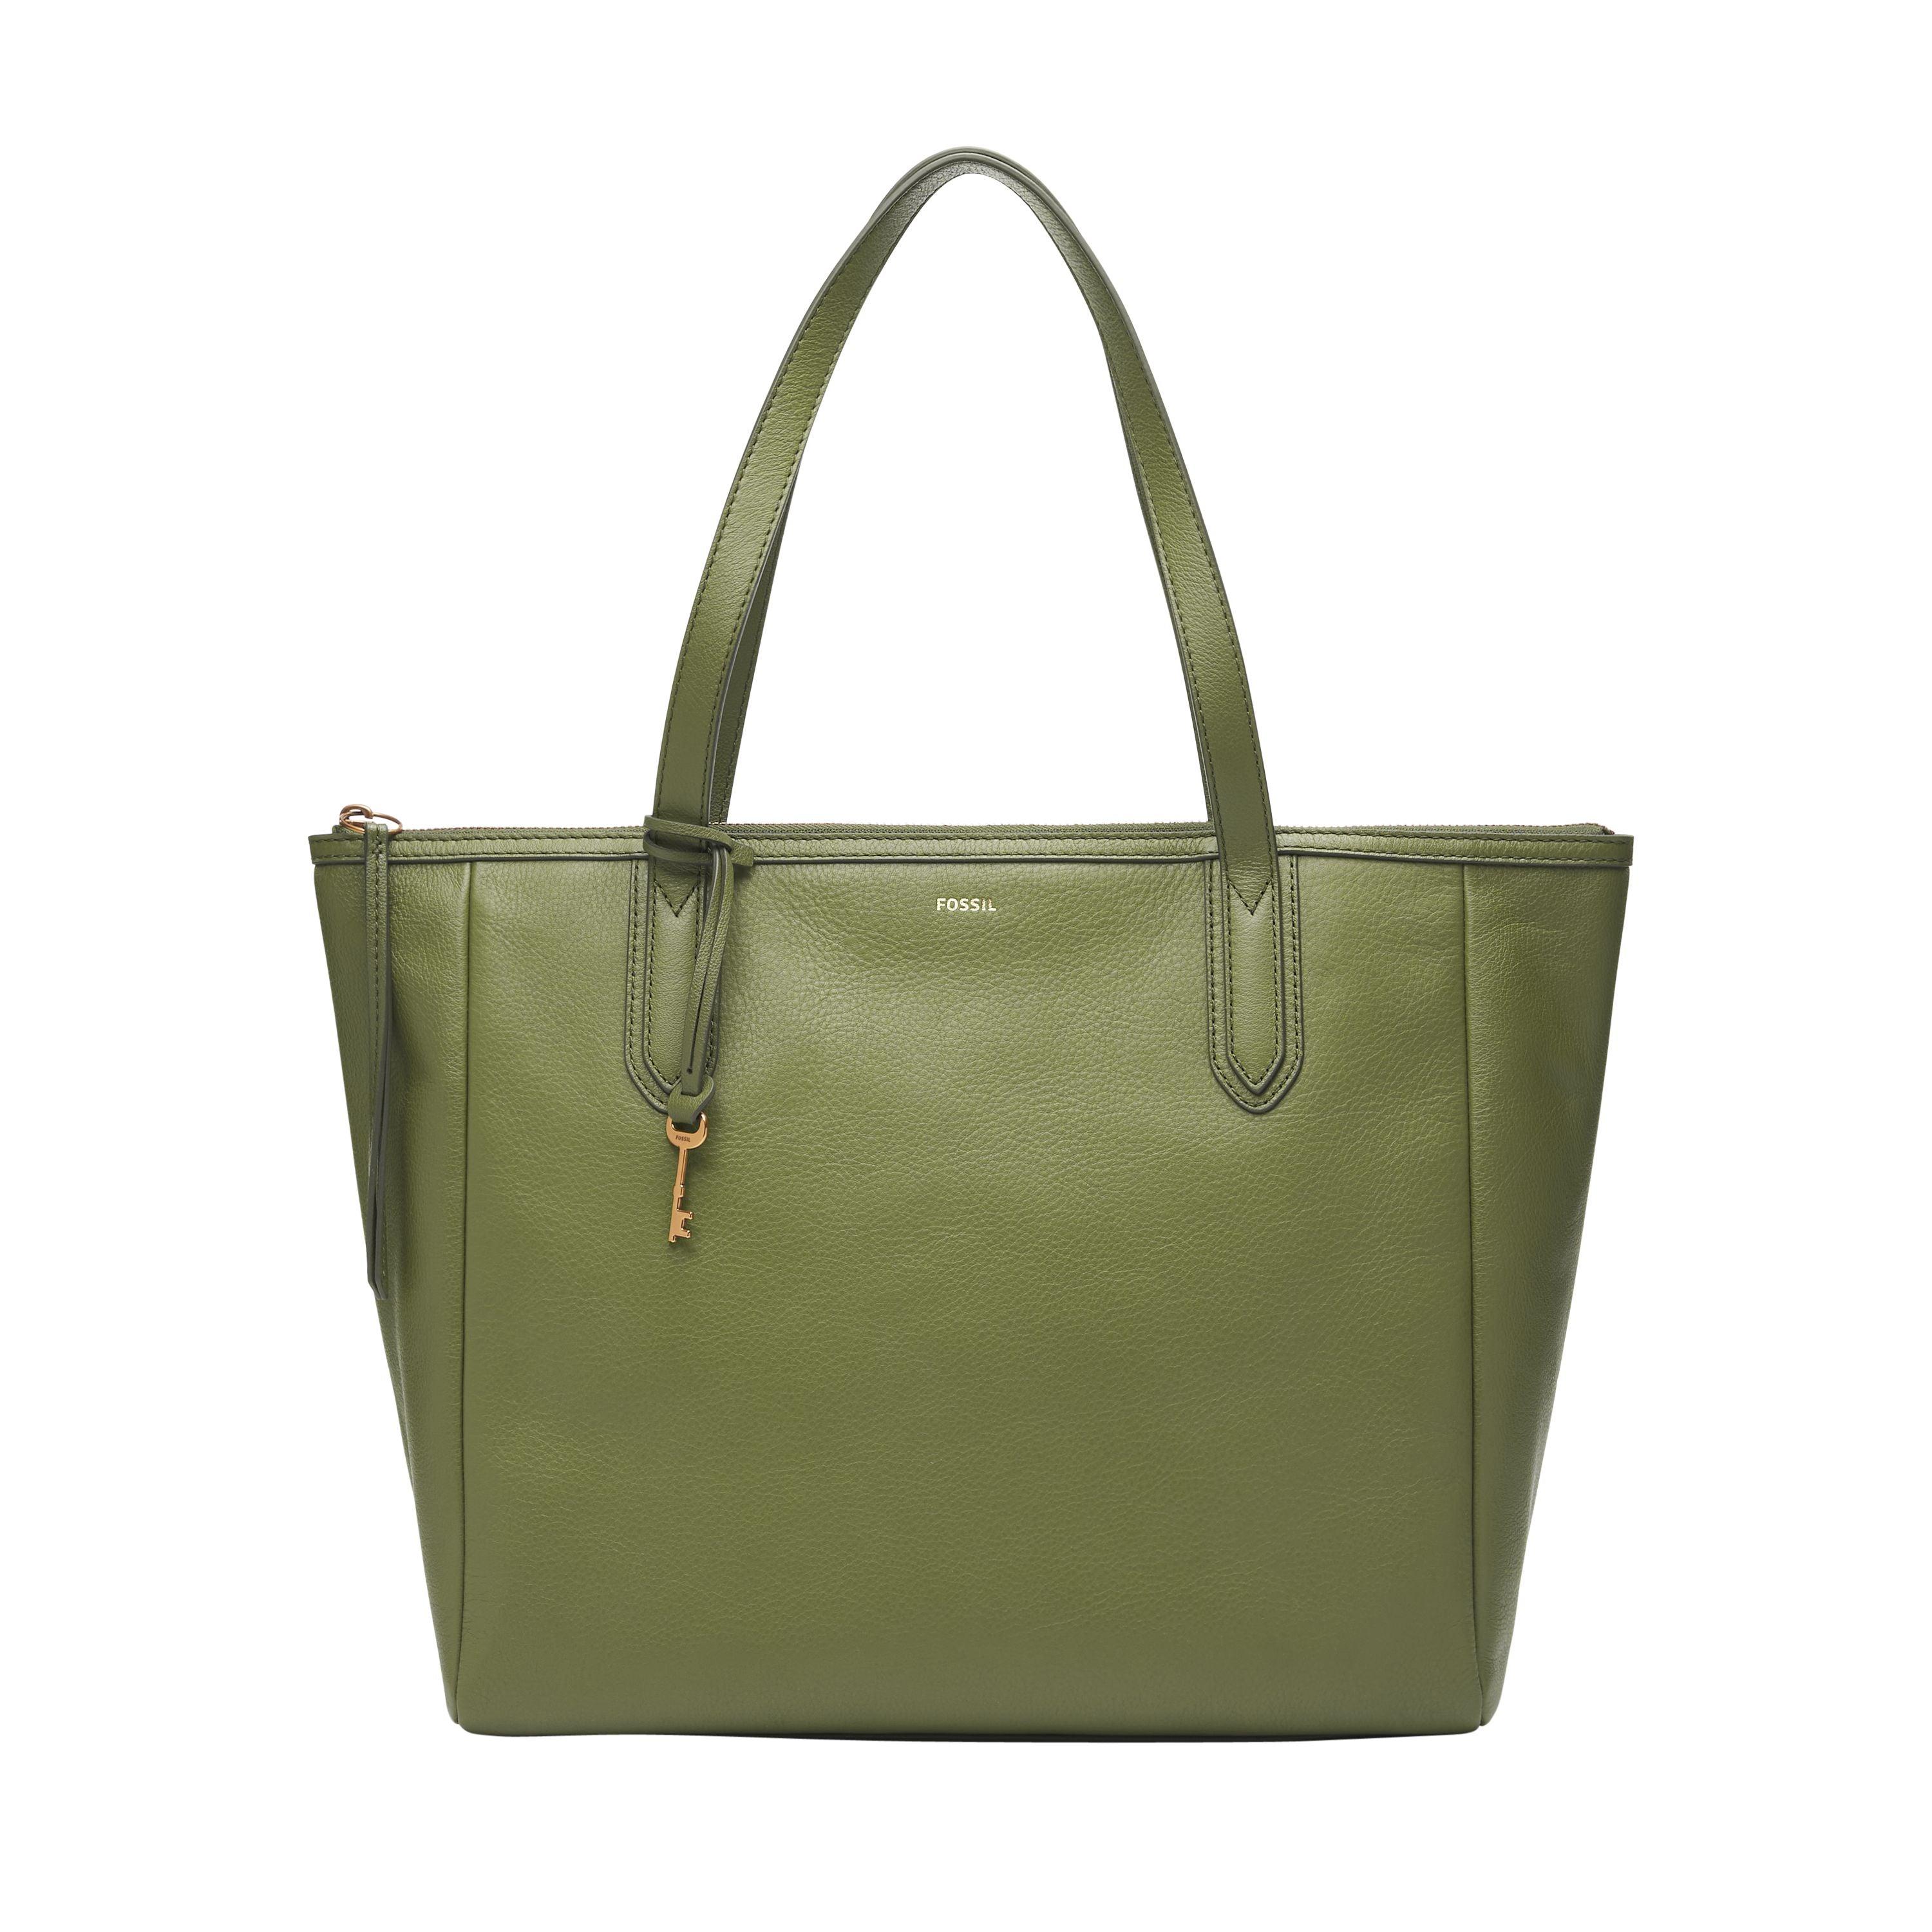 Fossil Sydney Litehide Leather Tote in Green | Lyst